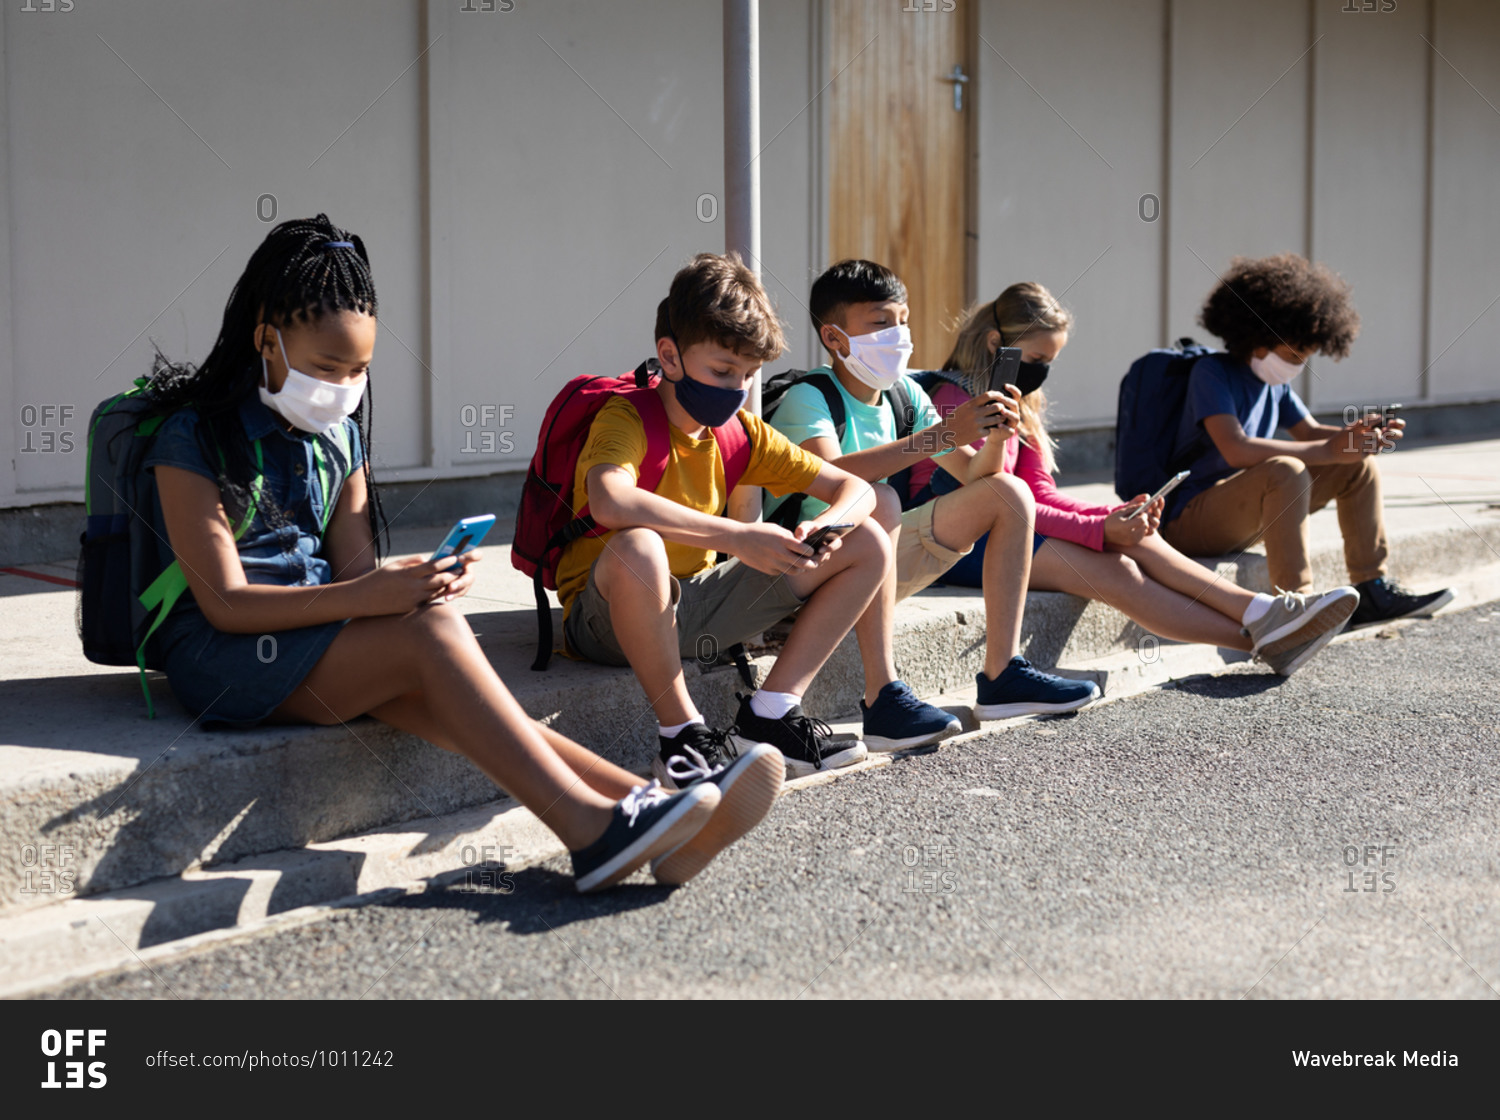 Multi ethnic group of elementary school kids wearing face masks using smartphones while sitting together. Primary education social distancing health safety during Covid19 Coronavirus pandemic.